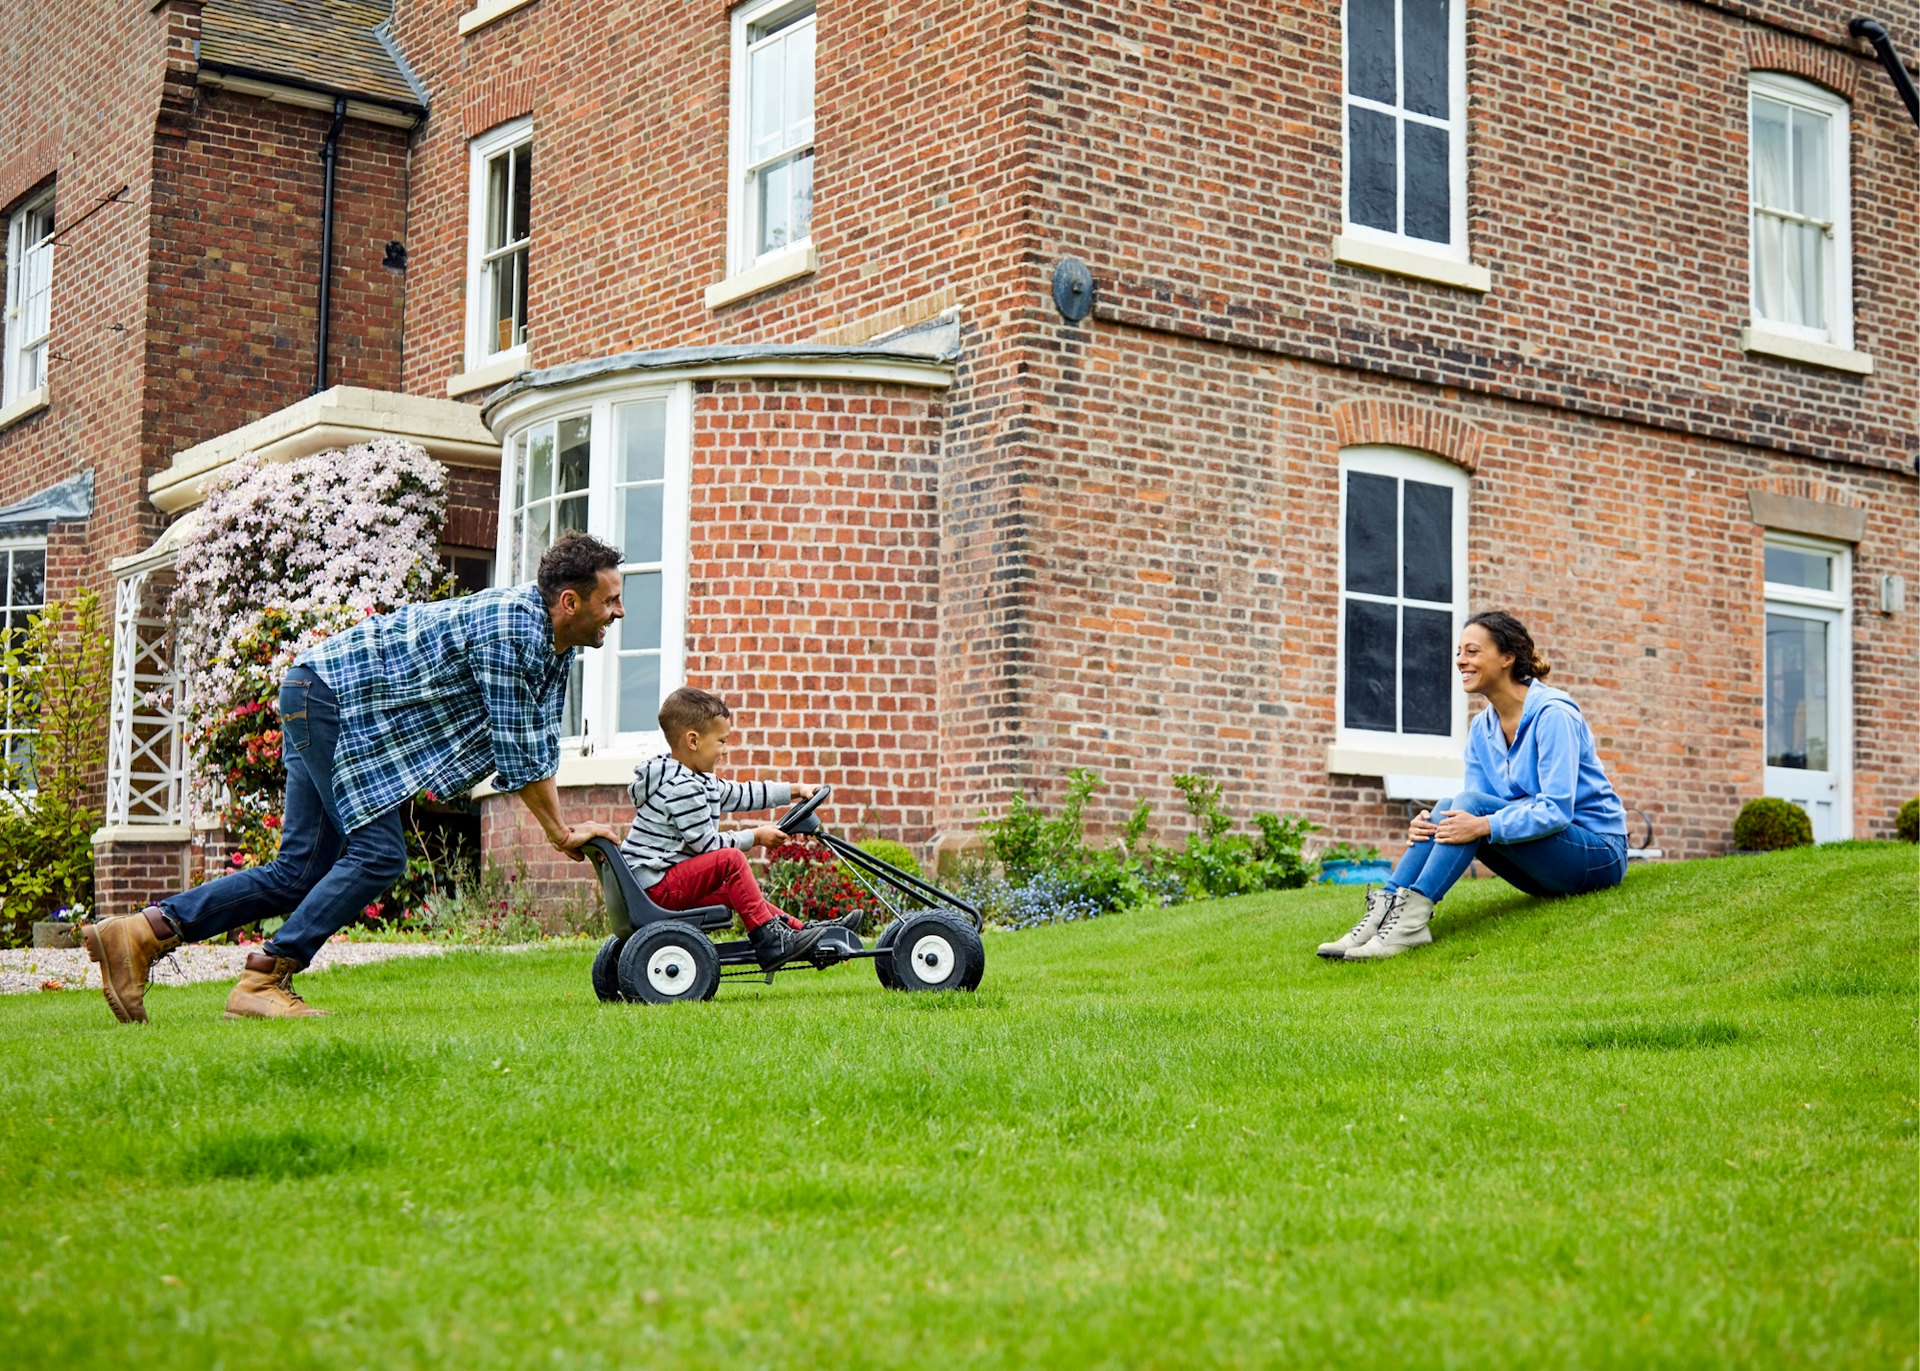 Family playing outside on grass